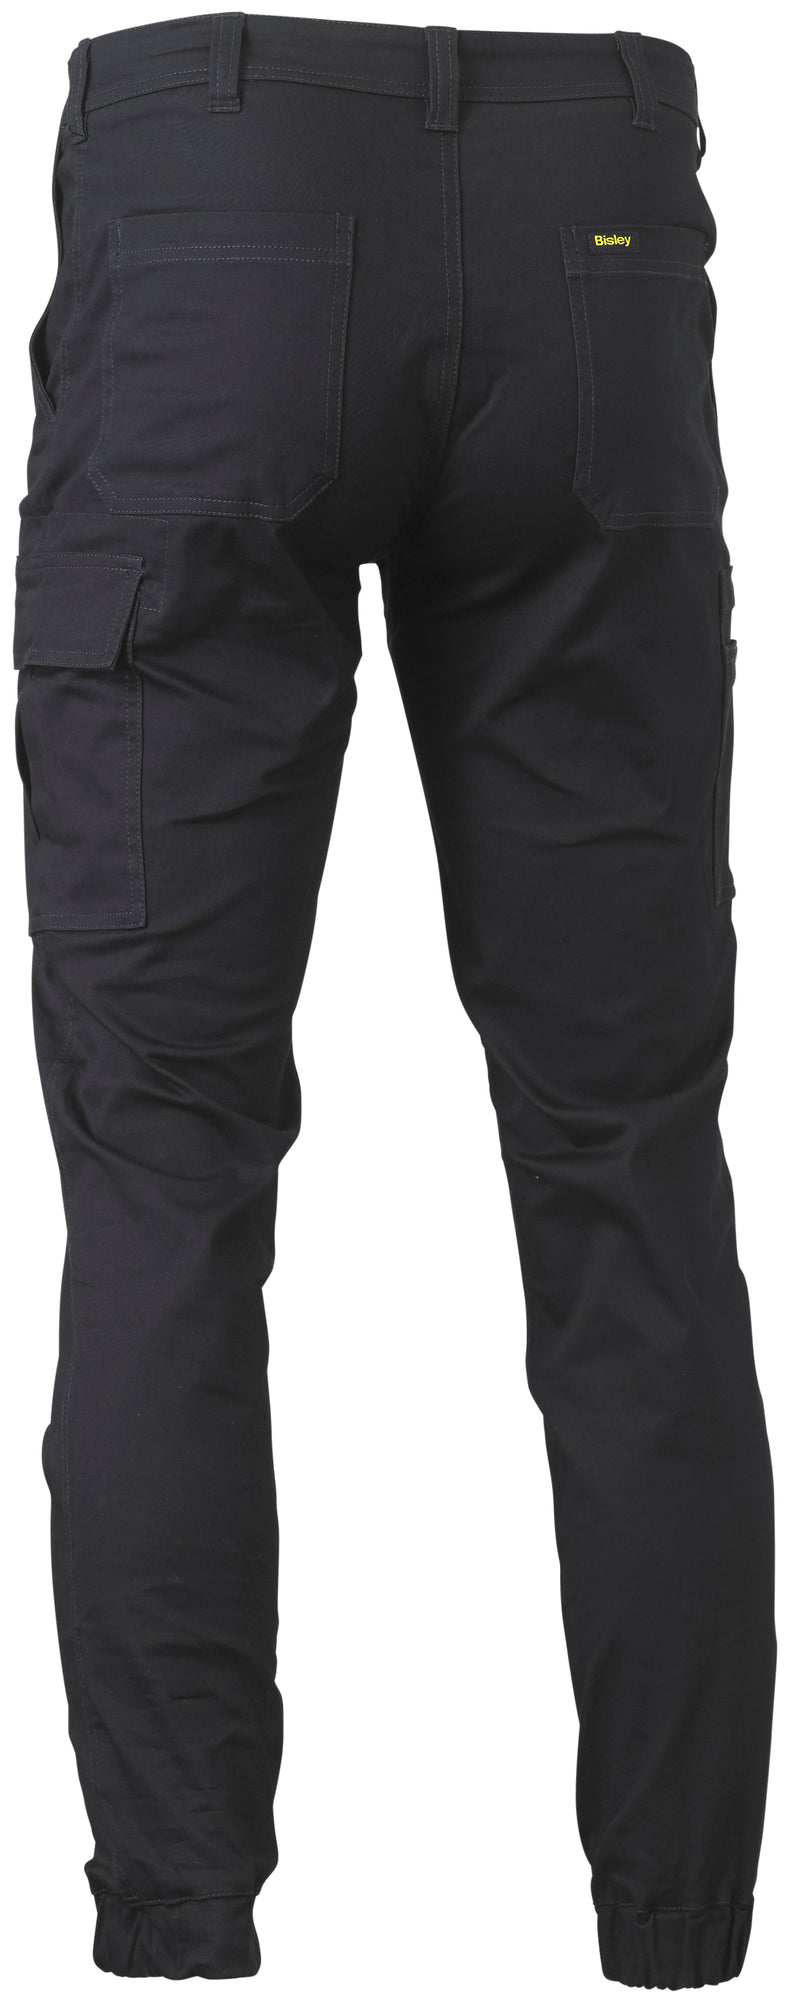 Load image into Gallery viewer, Wholesale BPC6028 Bisley Stretch Cotton Drill Cargo Cuffed Pants - Regular Printed or Blank
